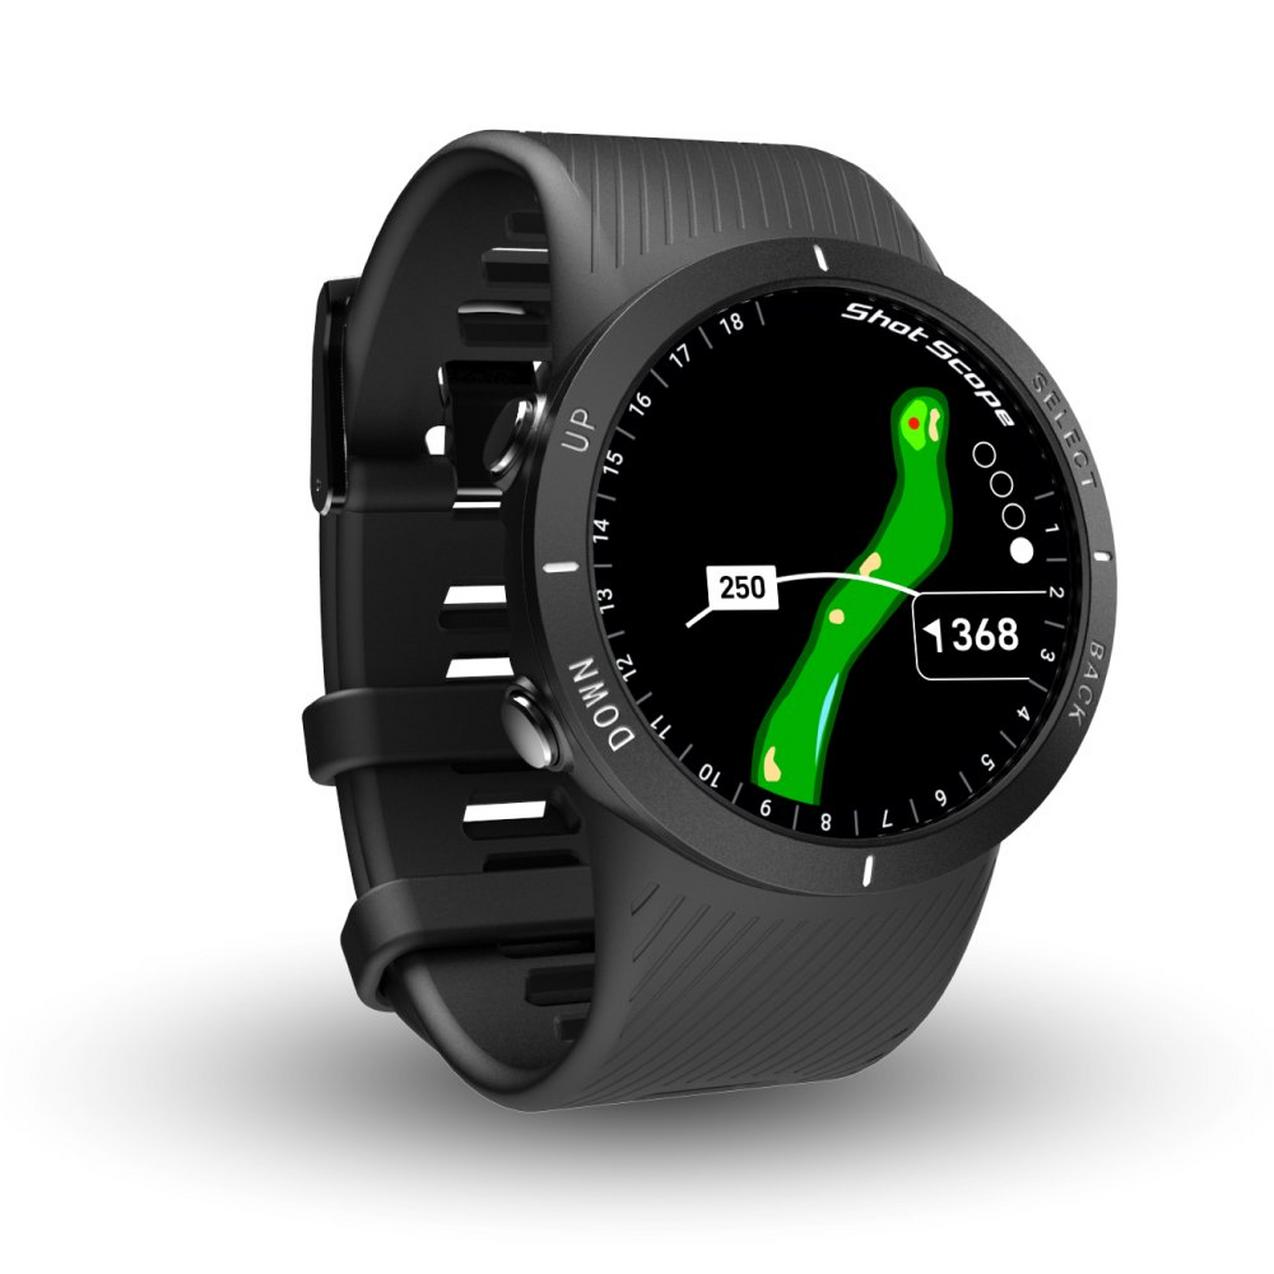 V5 GPS Watch and Performance Tracking | SHOT SCOPE | GPS Watches 